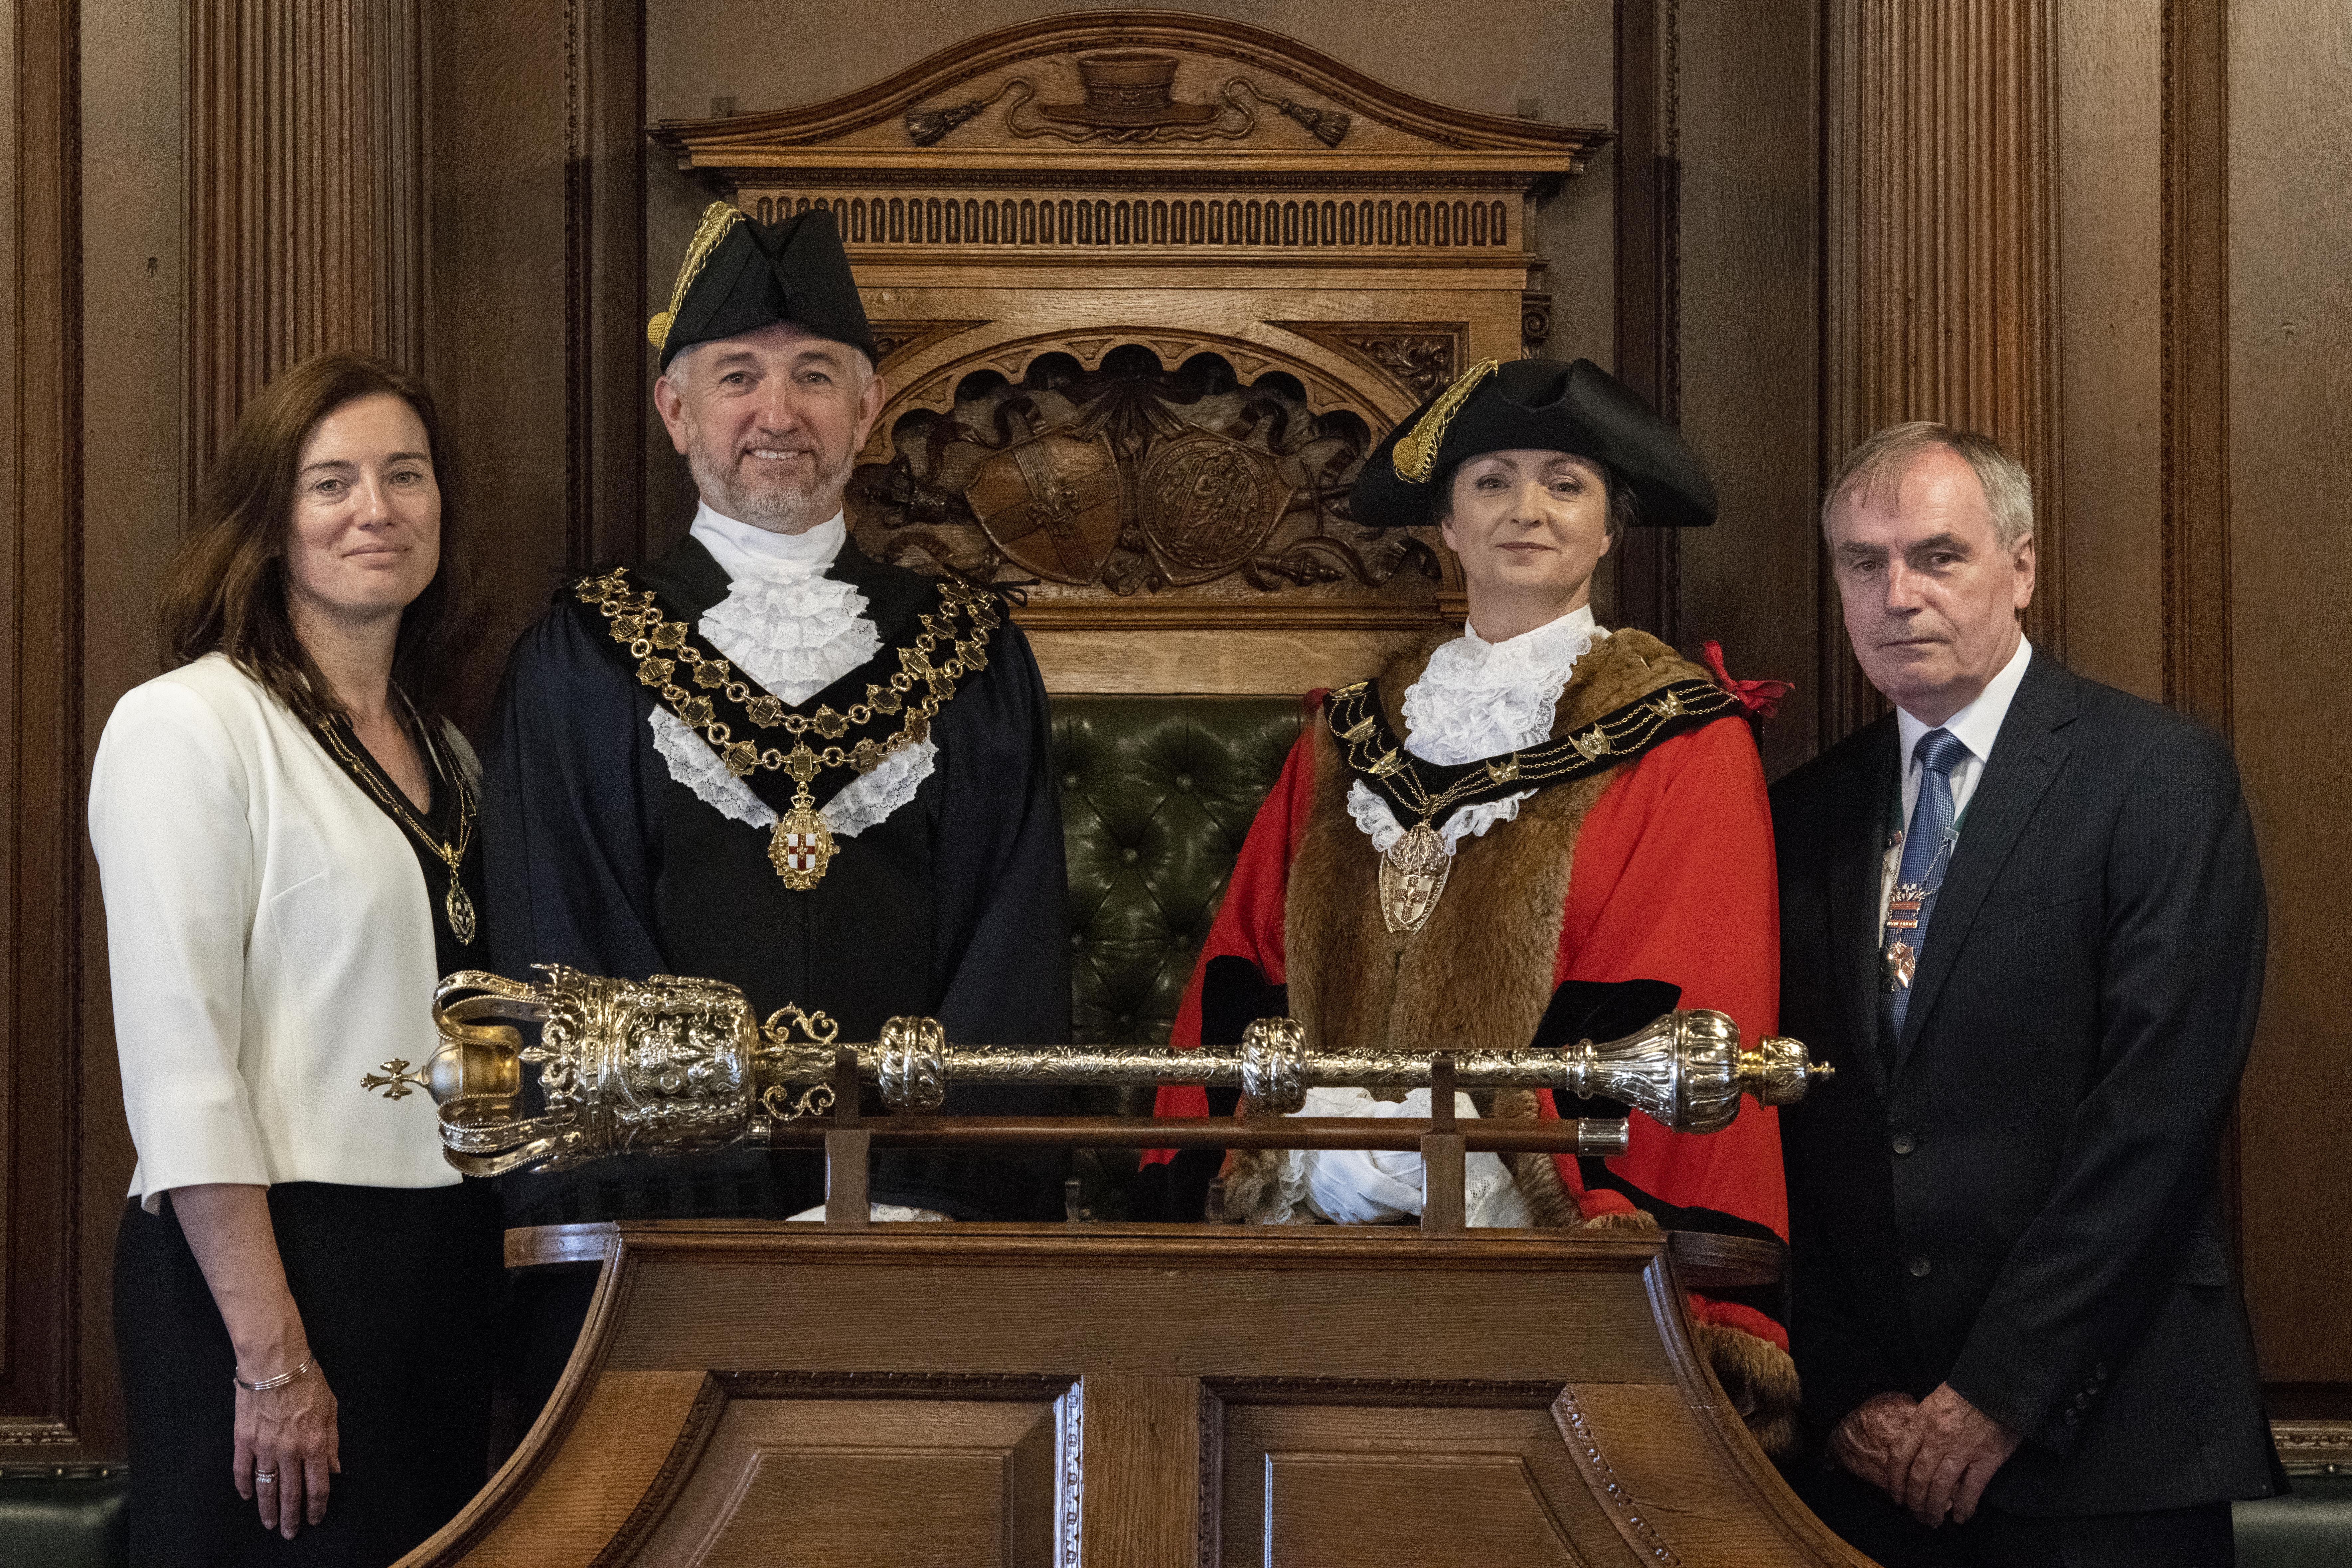 The Right Worshipful the Mayor of Lincoln Cllr Jackie Kirk with her consort